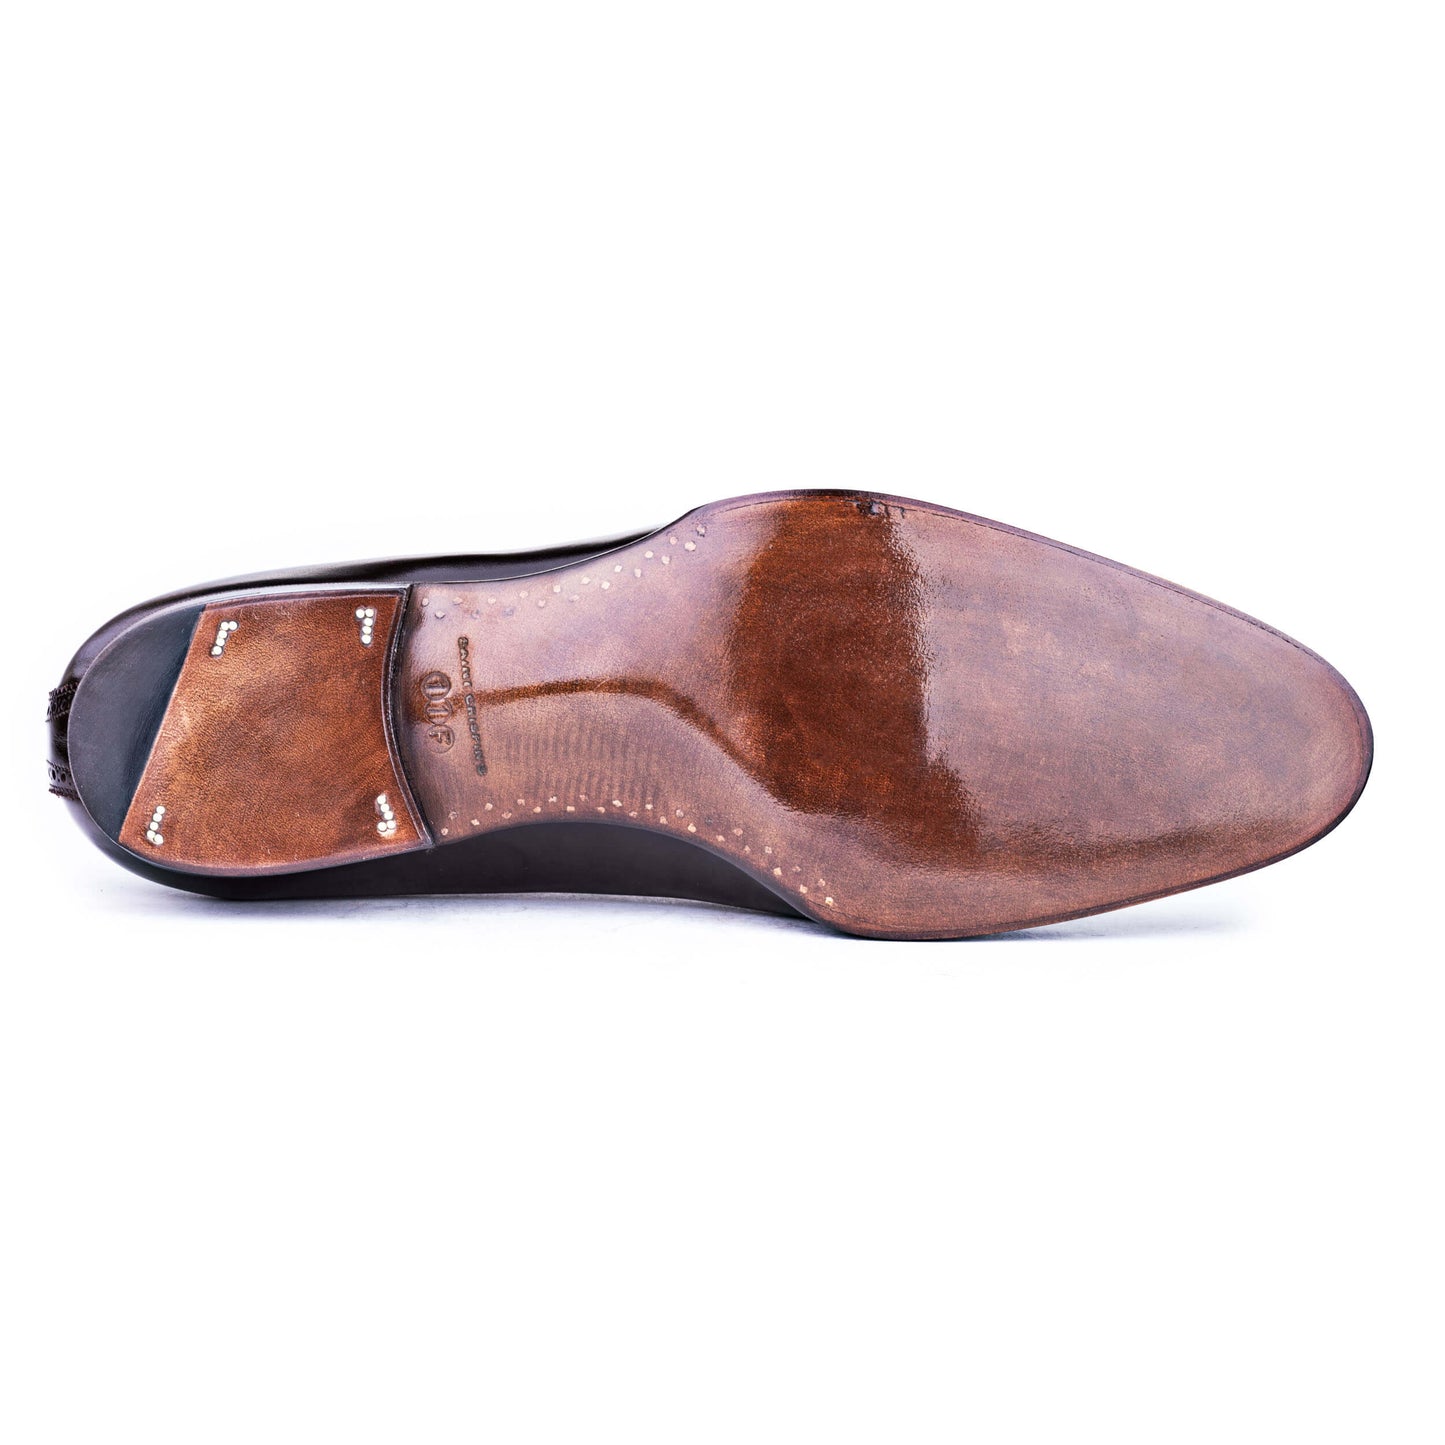 Des Voeux - Oxford with diamond toe cap and medallion